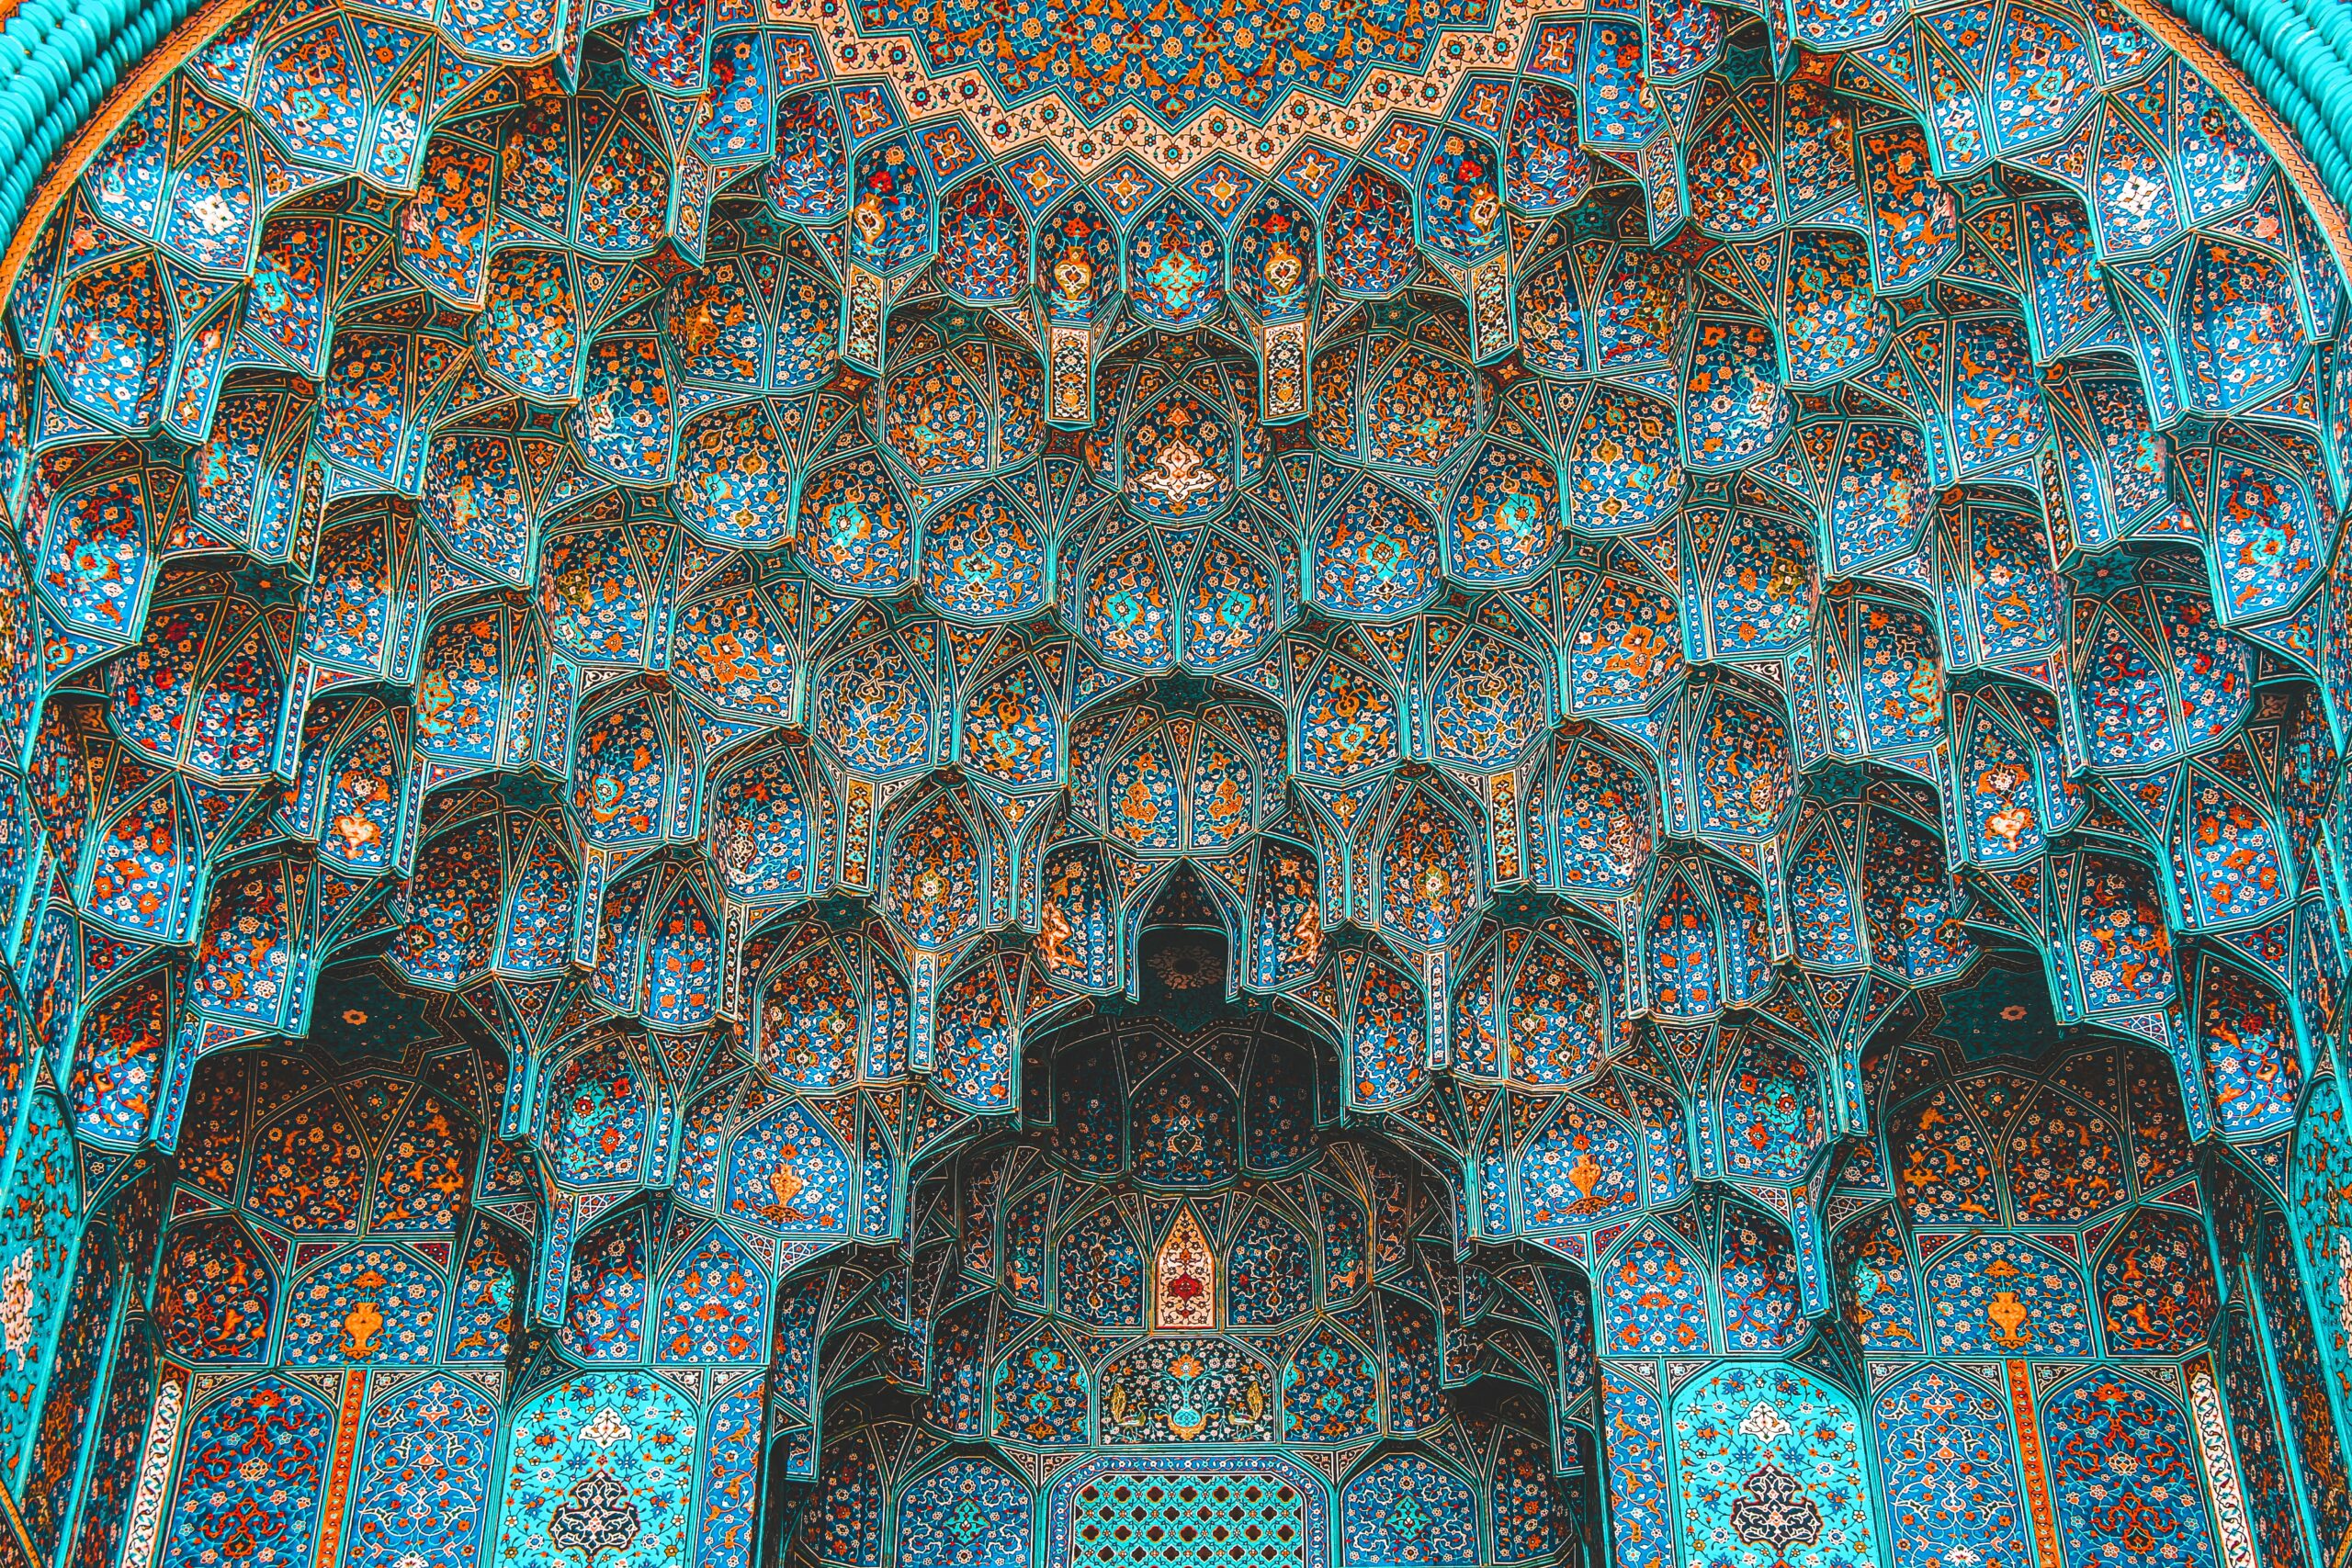 Picture of the intricate blue designs on the roof of a Moschee in Ispahan in Iran